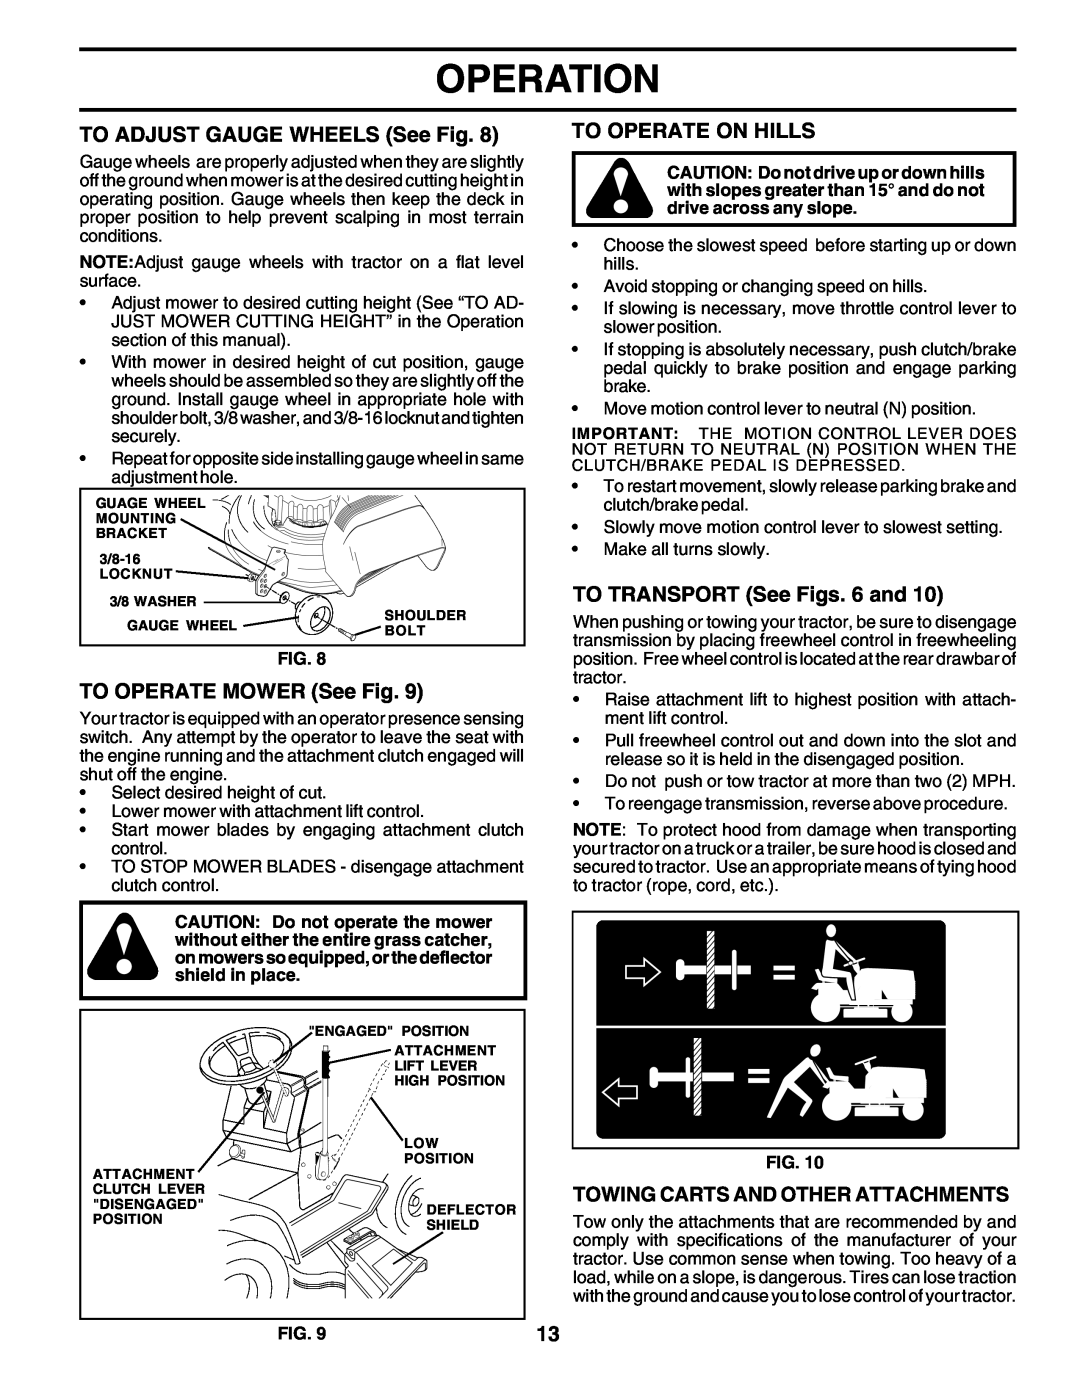 Weed Eater SGT18H46C manual Operation, TO ADJUST GAUGE WHEELS See Fig, To Operate On Hills, TO OPERATE MOWER See Fig 